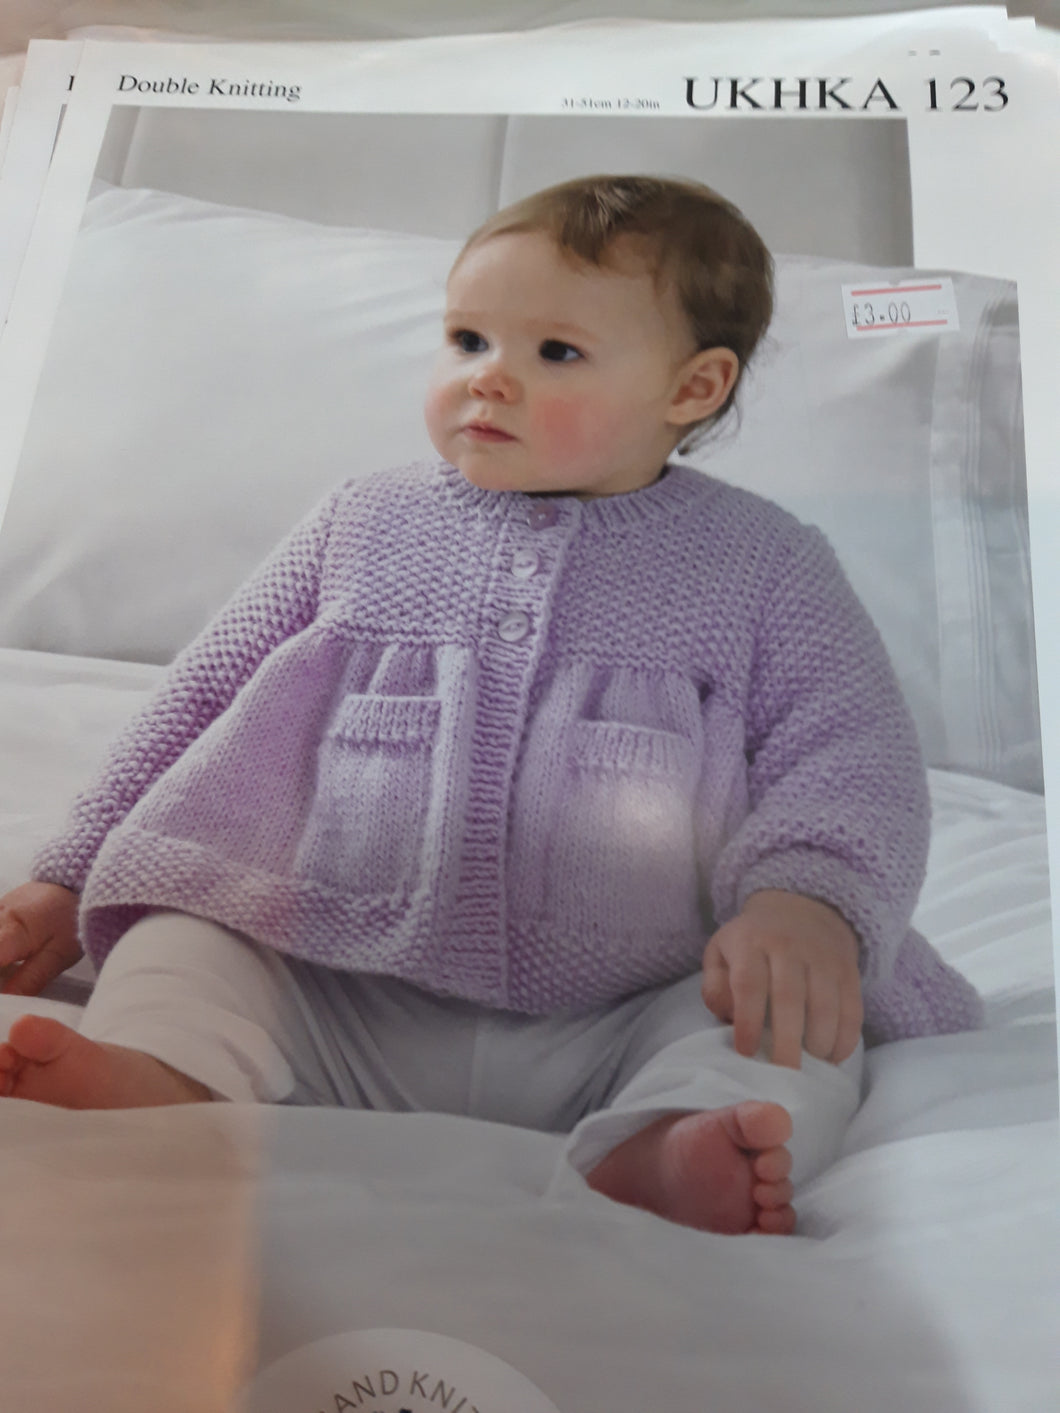 UKHKA 123 - Baby Double Knit - Cardigan and Blanket - 12